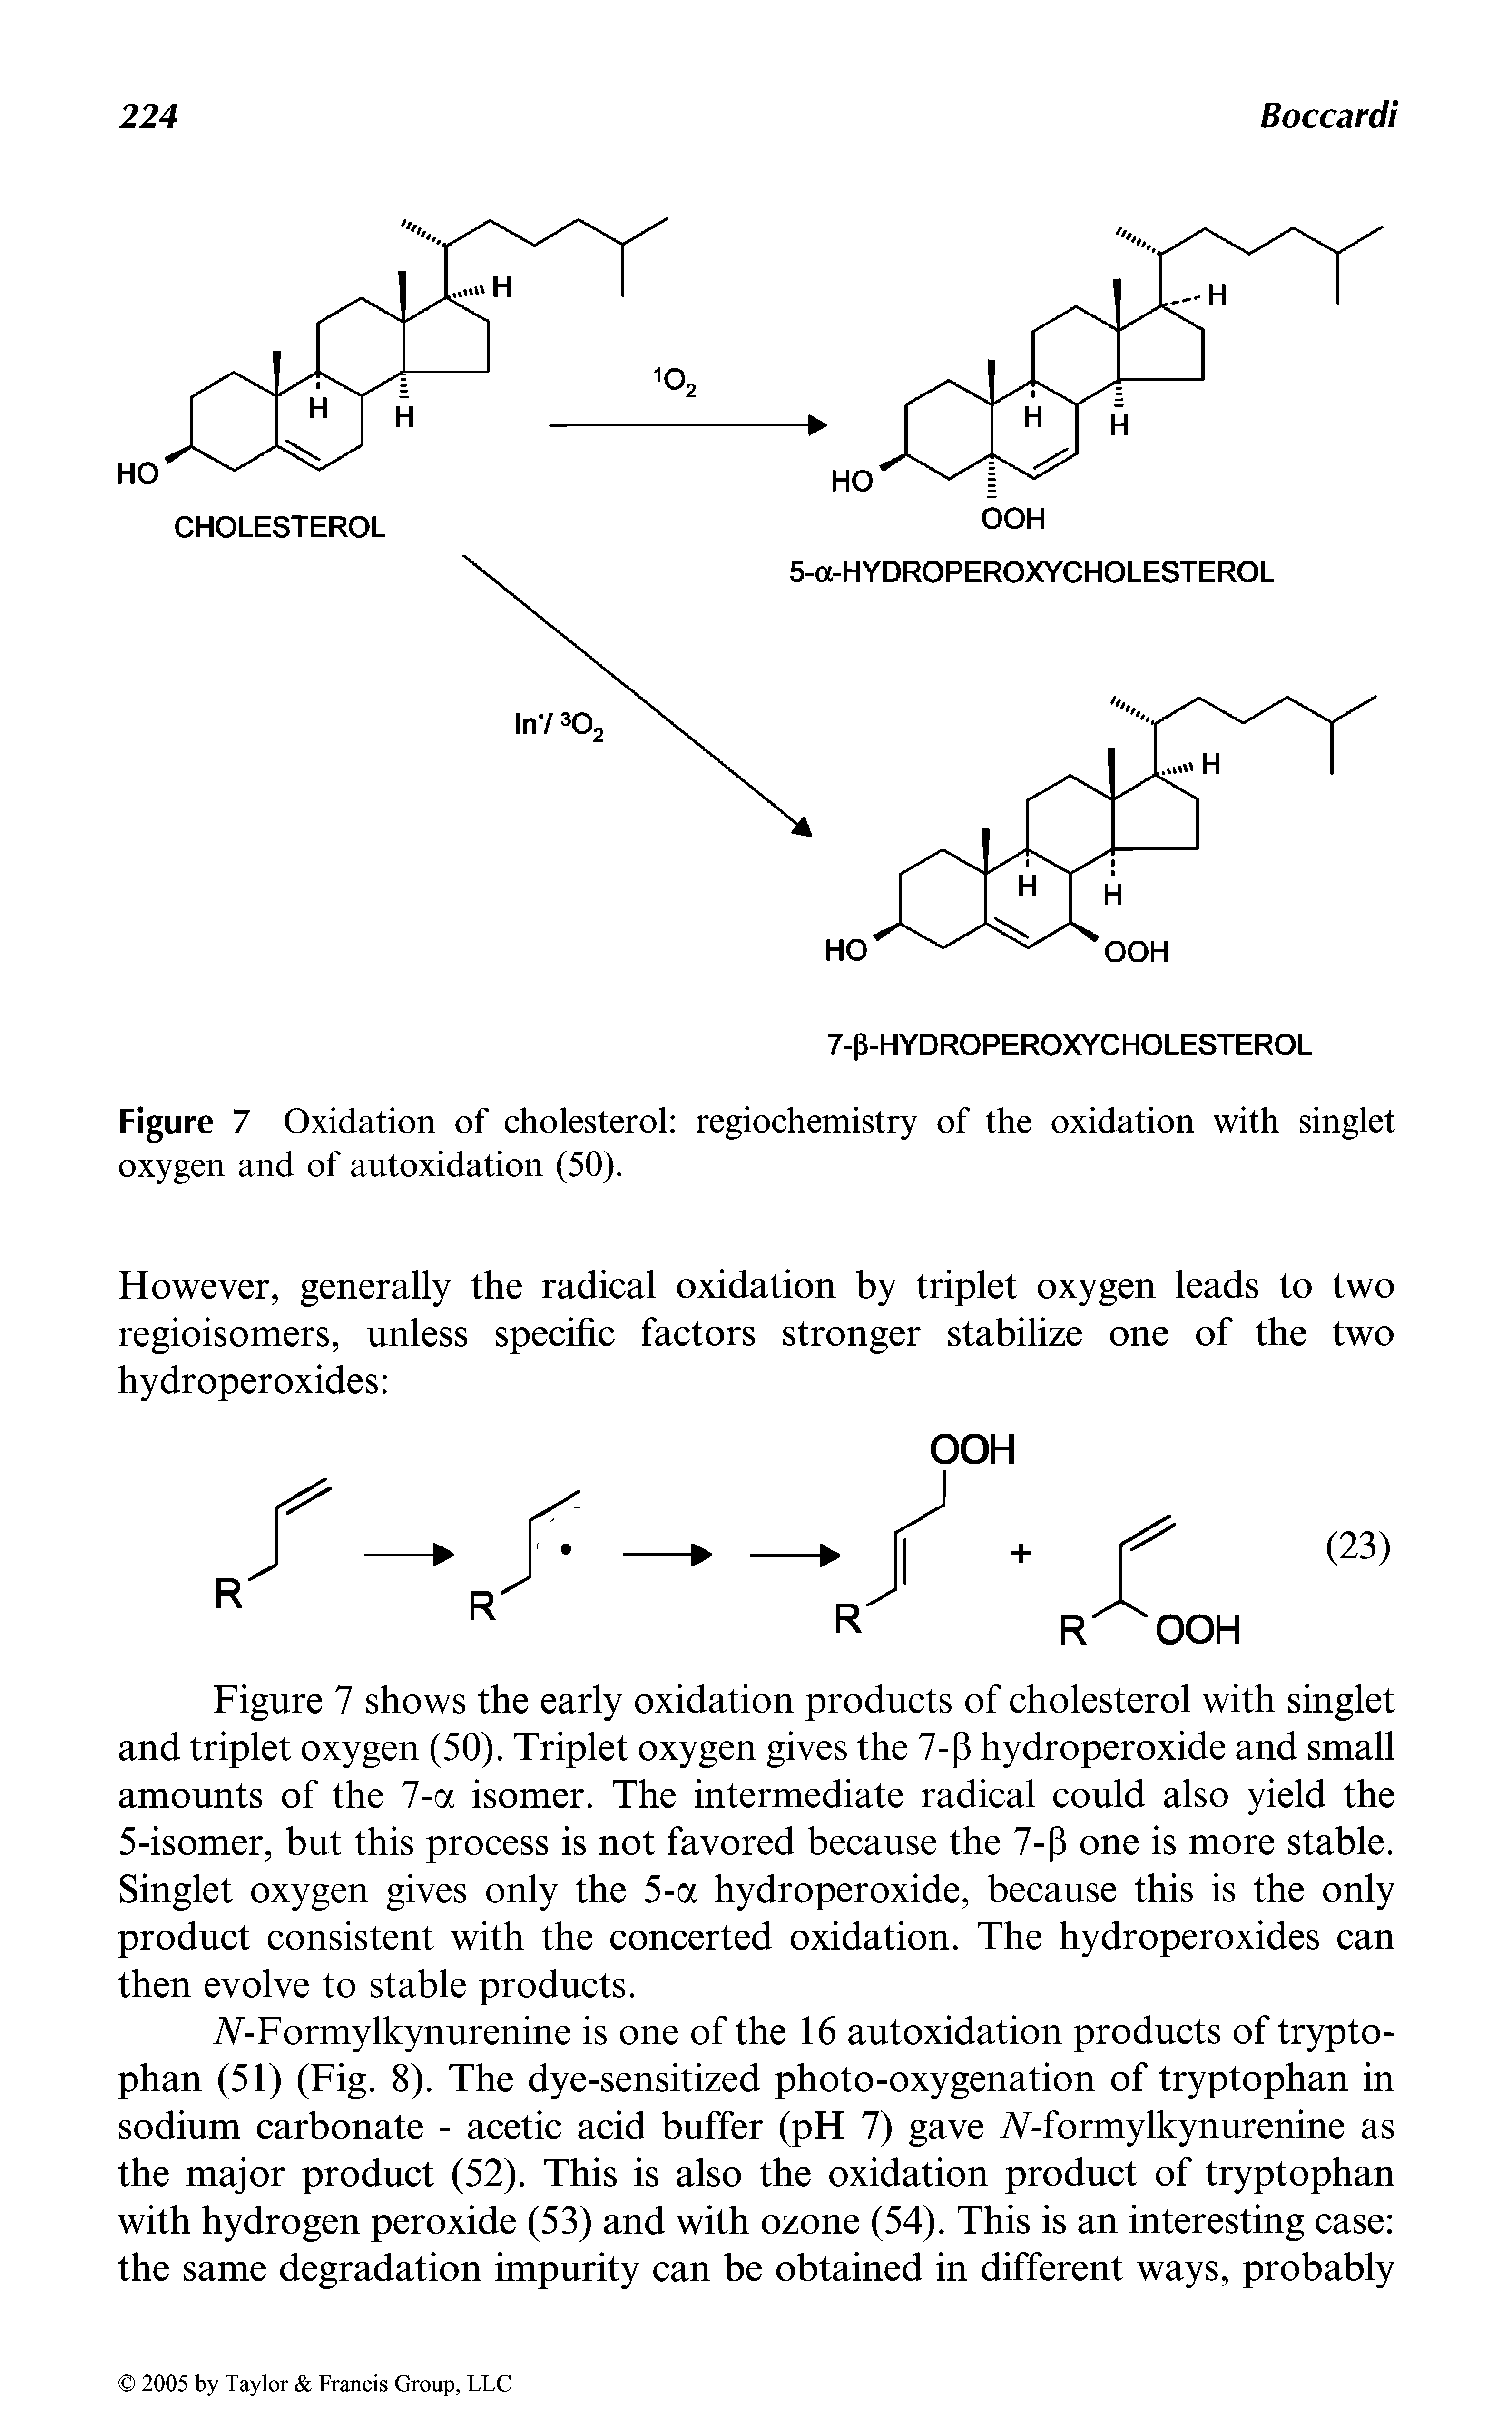 Figure 7 Oxidation of cholesterol regiochemistry of the oxidation with singlet oxygen and of autoxidation (50).